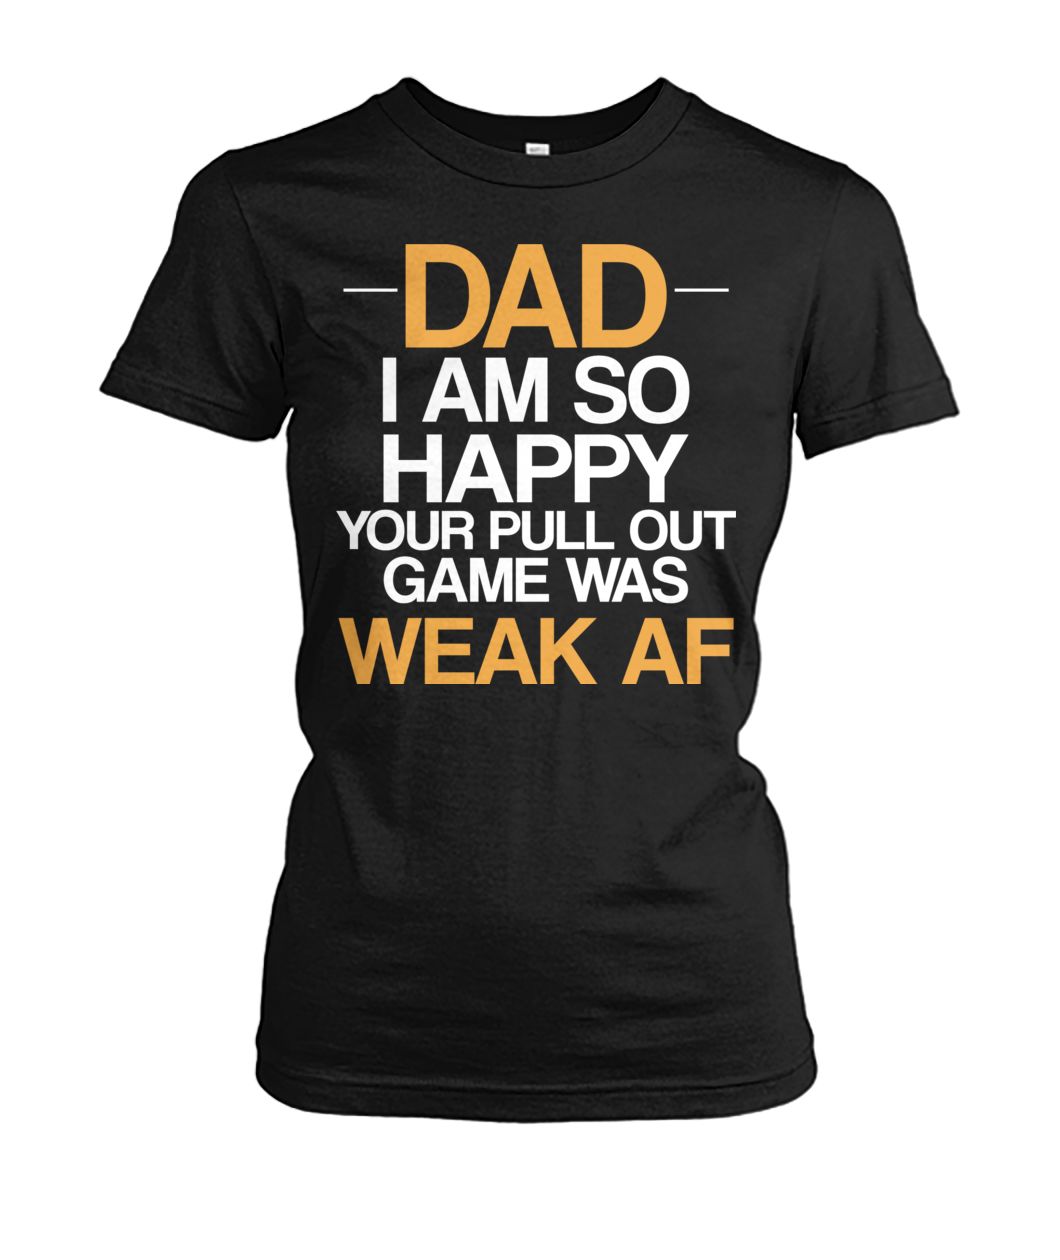 Dad I'm so happy your pull out game was weak af women's crew tee